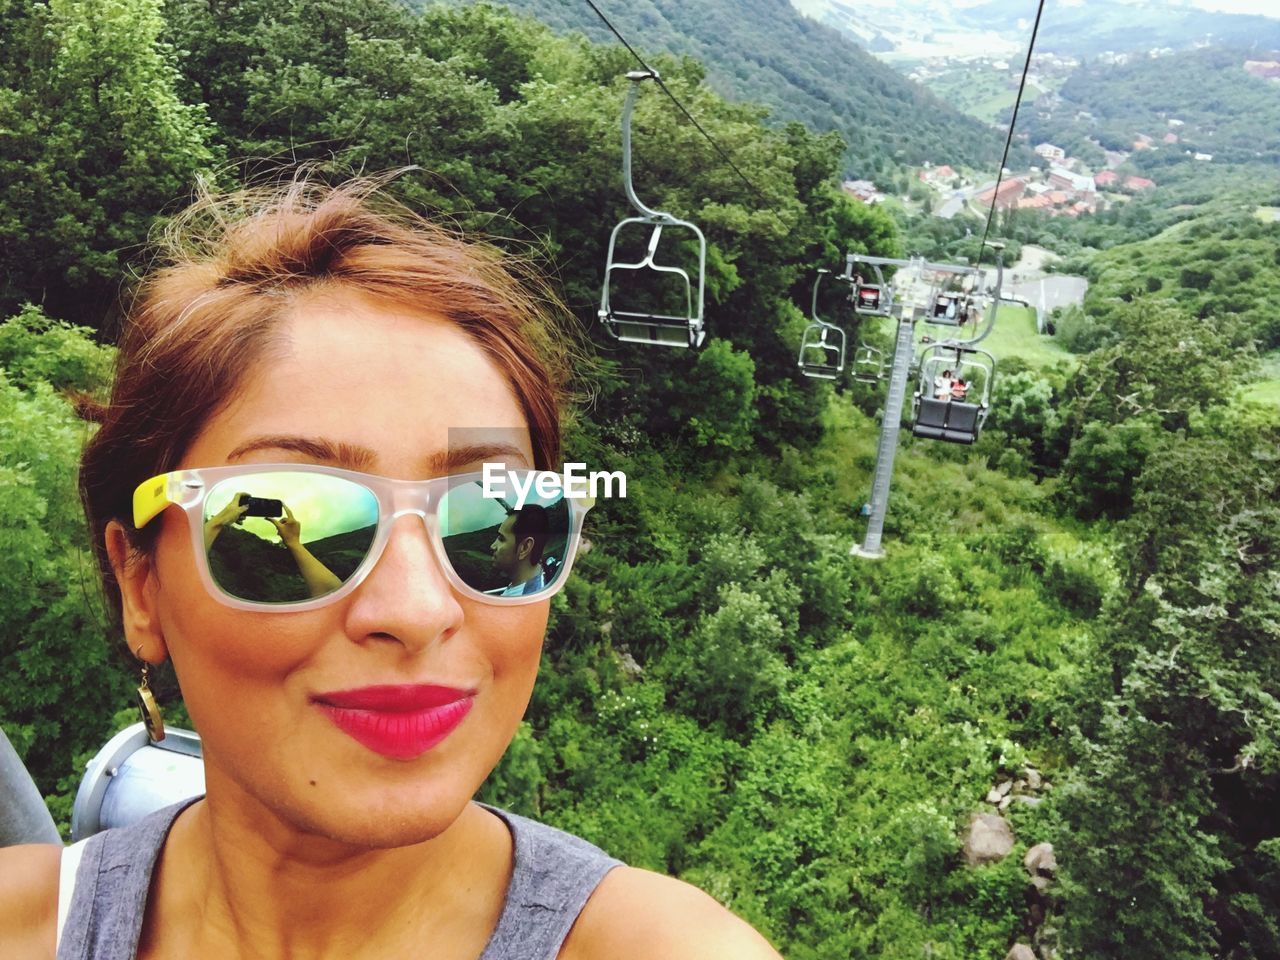 Portrait of young woman wearing sunglasses with reflection against ski lift over trees